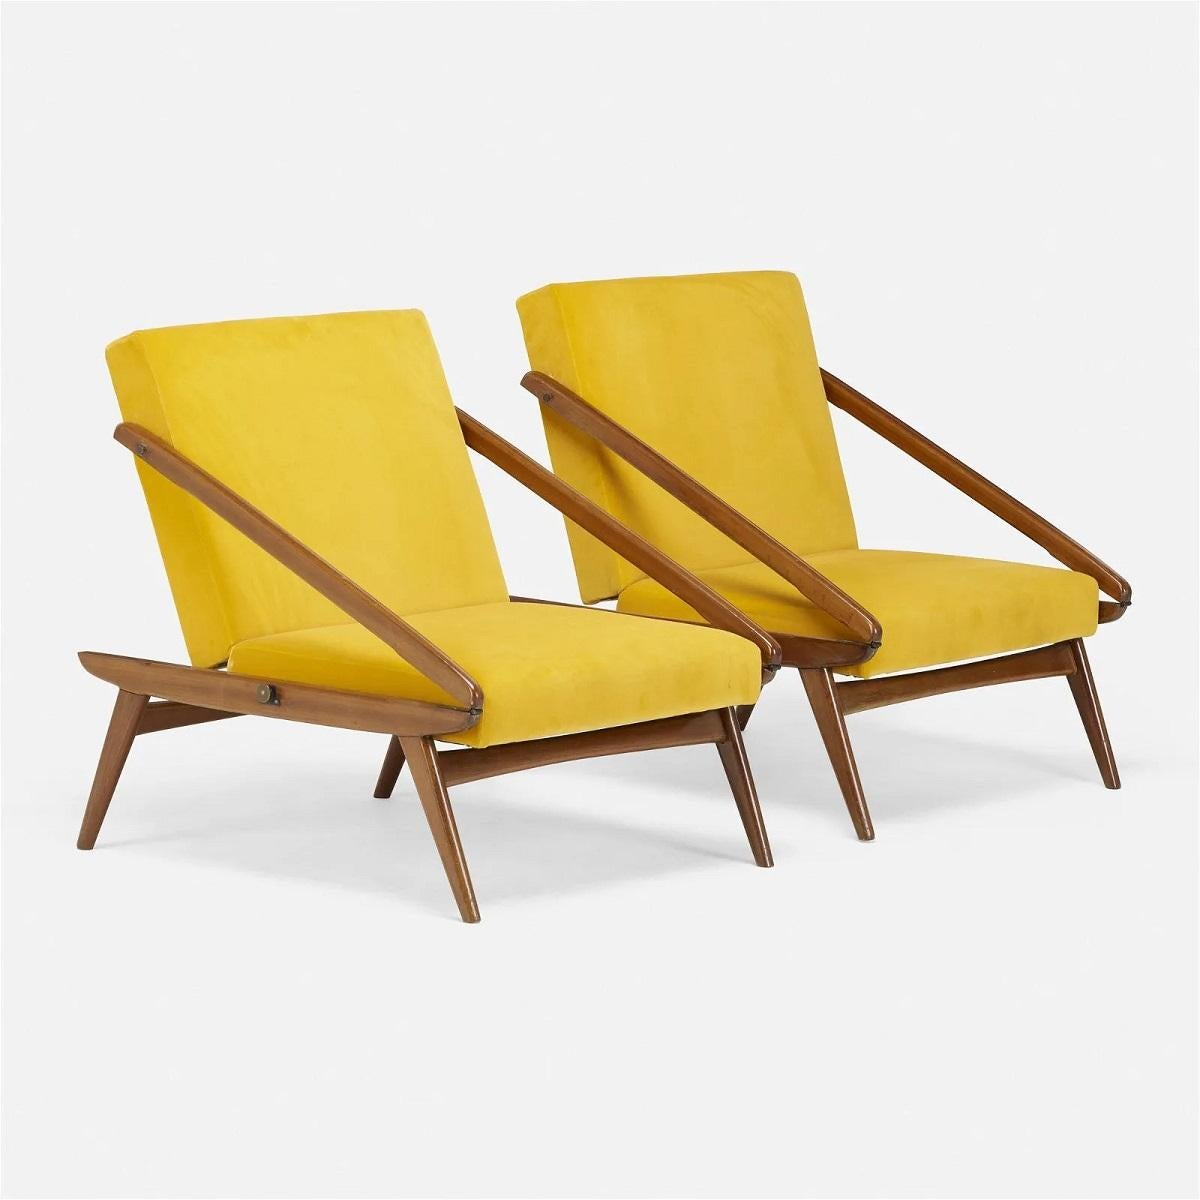 Pair of Ejvind A. Johansson adjustable lounge chairs for ISA Bergamo. The chairs have mahogany frames, velvet upholstery and can adjust to a flat or upright position. There is a metal manufacturer's label to the underside of one of the chairs 